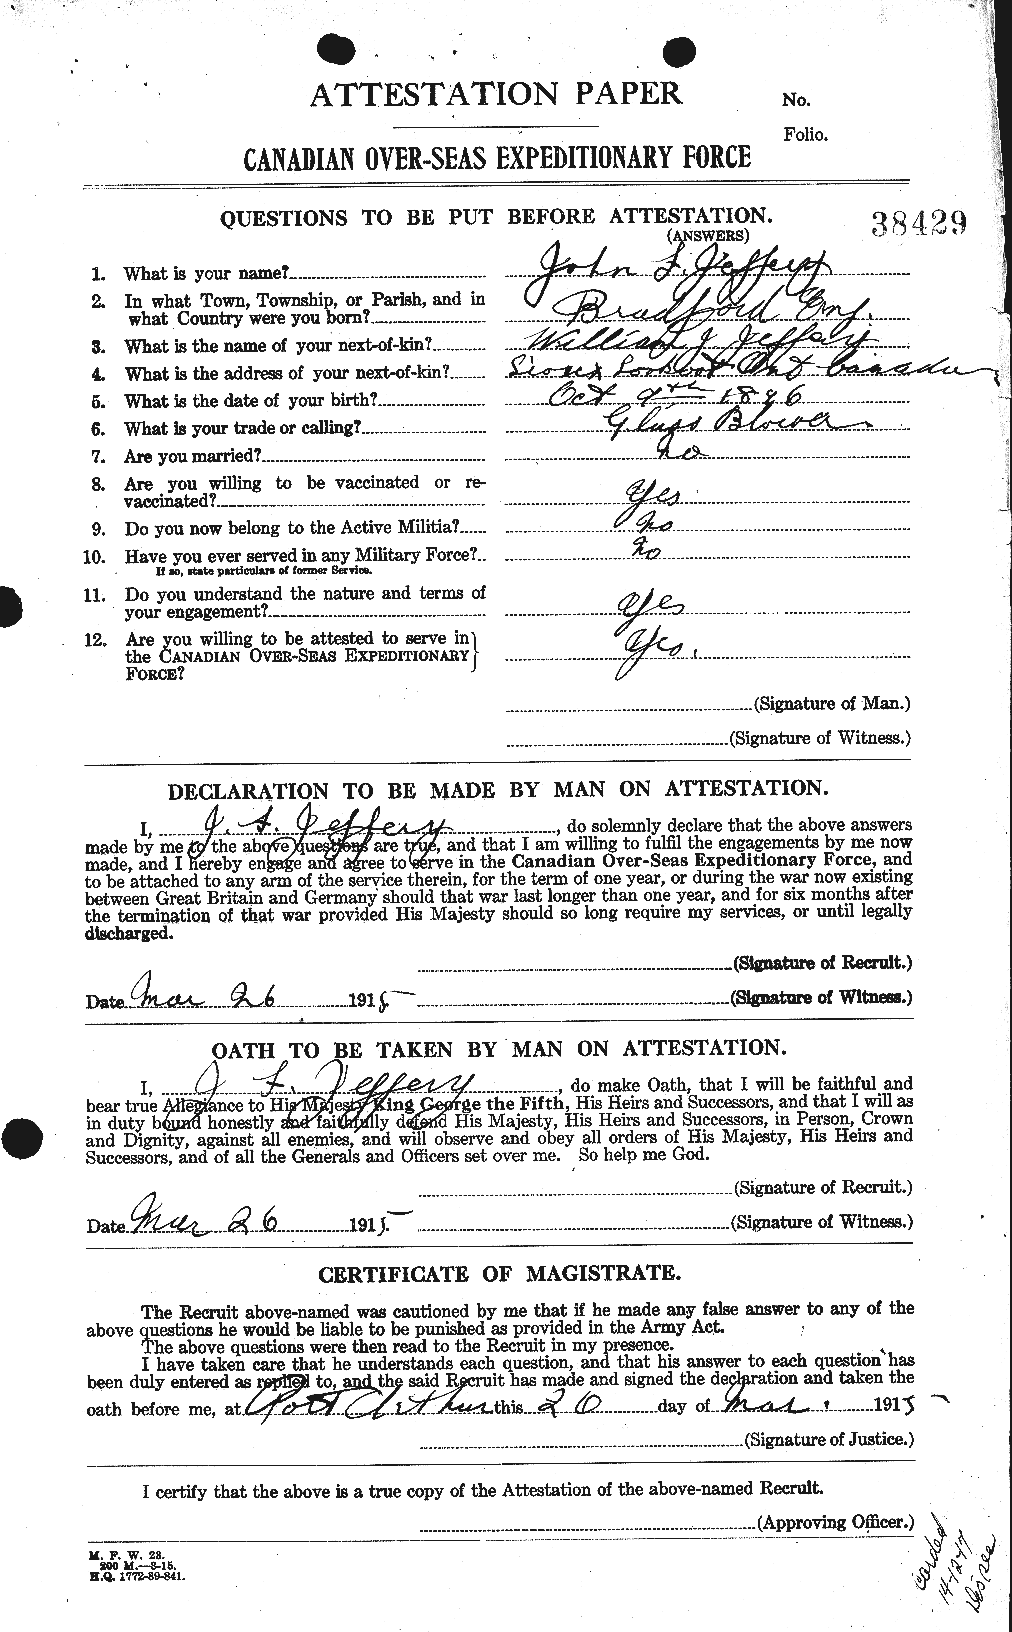 Personnel Records of the First World War - CEF 417776a